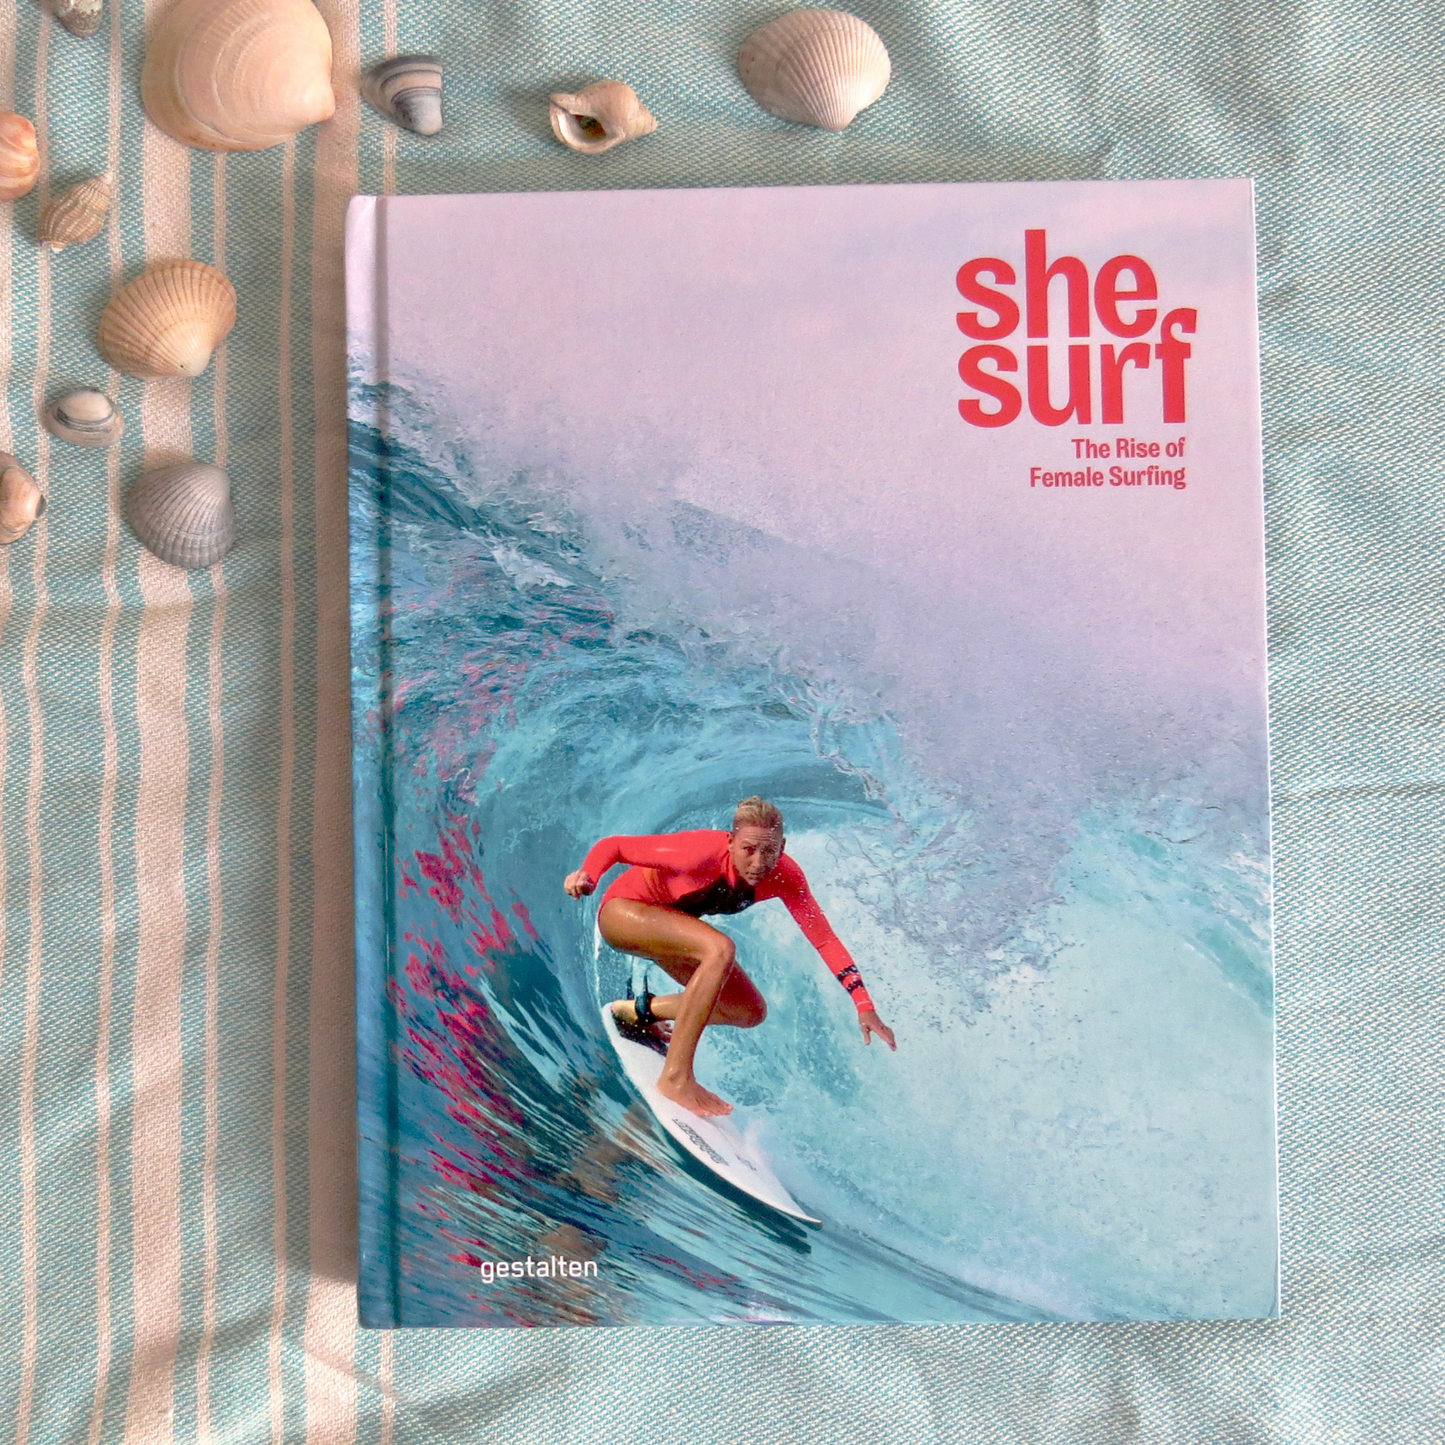 She Surf - The Rise of Female Surfing